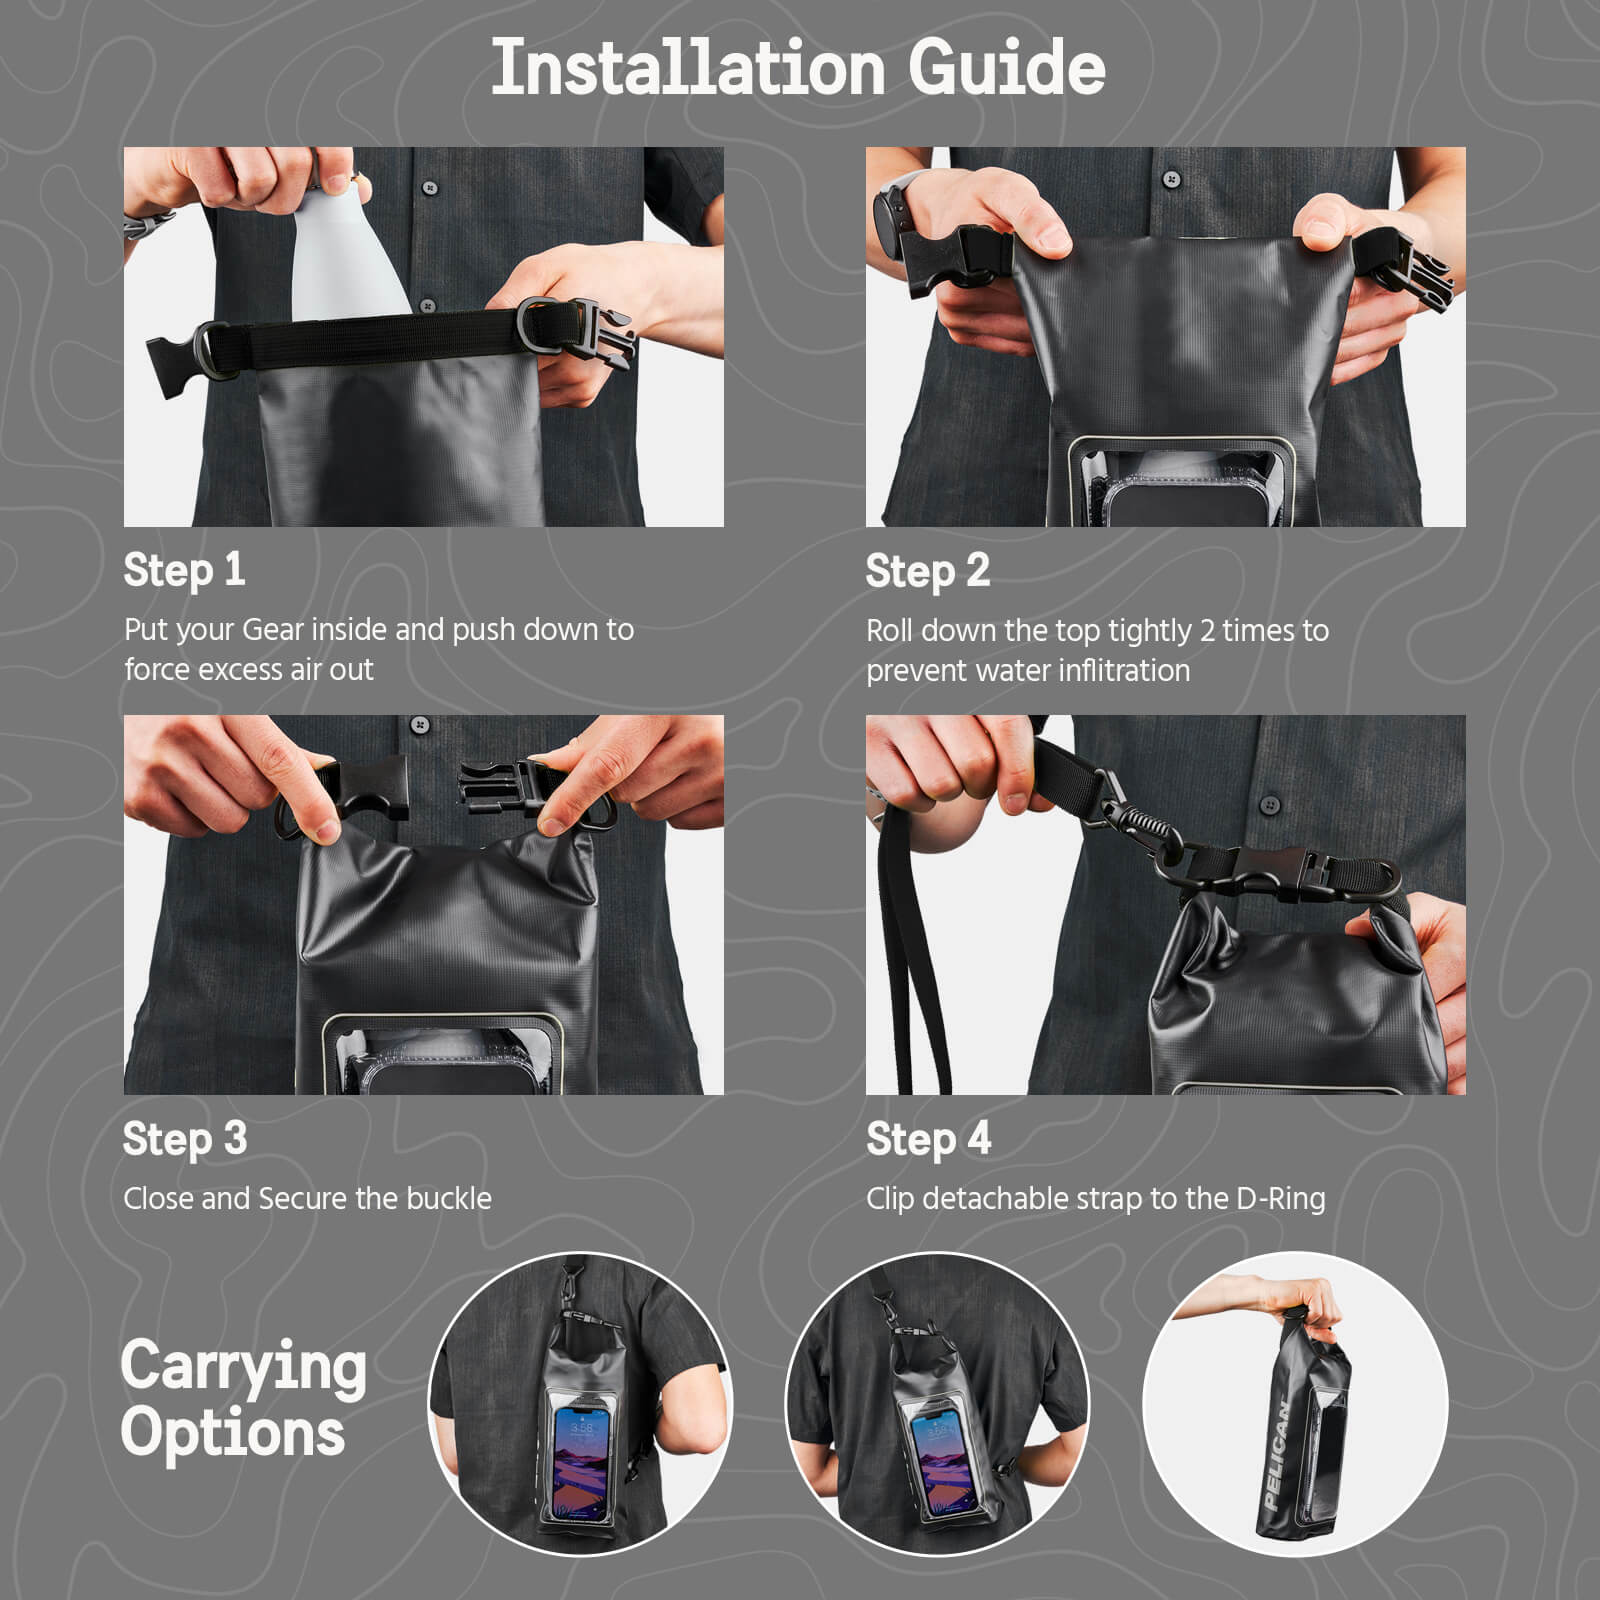 Pelican Marine Water Resistant Dry Bag Installation Guide. Step 1: Put your Gear inside and push down to force excess air out. Step 2: Roll down the top tightly 2 times to prevent water infiltration. Step 3: Close and Secure the buckle. Step 4: Clip detachable strap to the D-Ring. Color:: Stealth Black